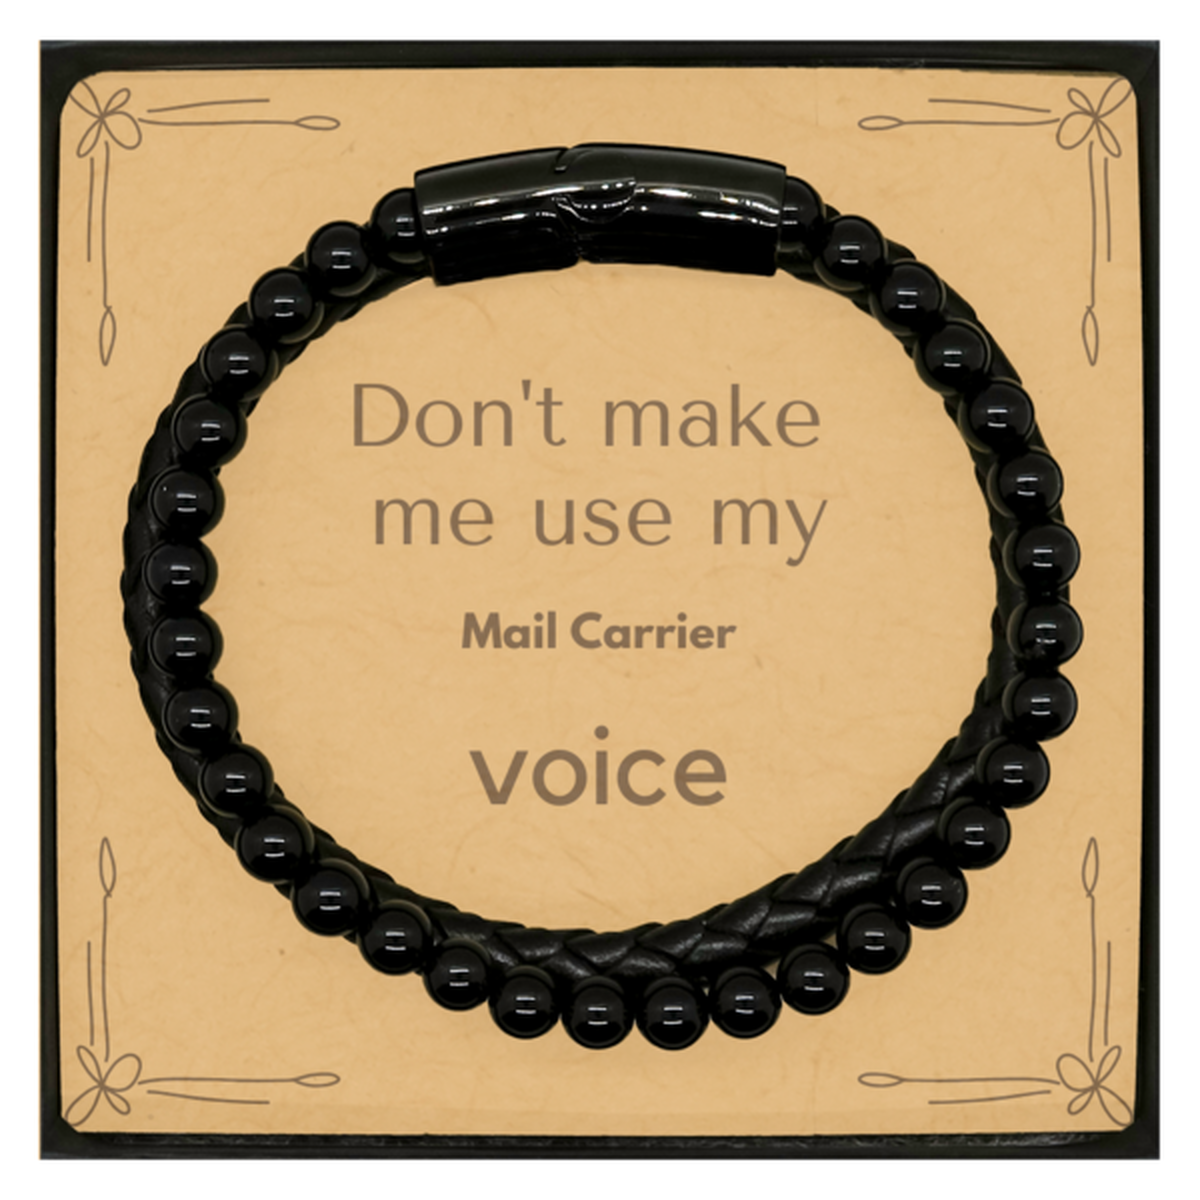 Don't make me use my Mail Carrier voice, Sarcasm Mail Carrier Card Gifts, Christmas Mail Carrier Stone Leather Bracelets Birthday Unique Gifts For Mail Carrier Coworkers, Men, Women, Colleague, Friends